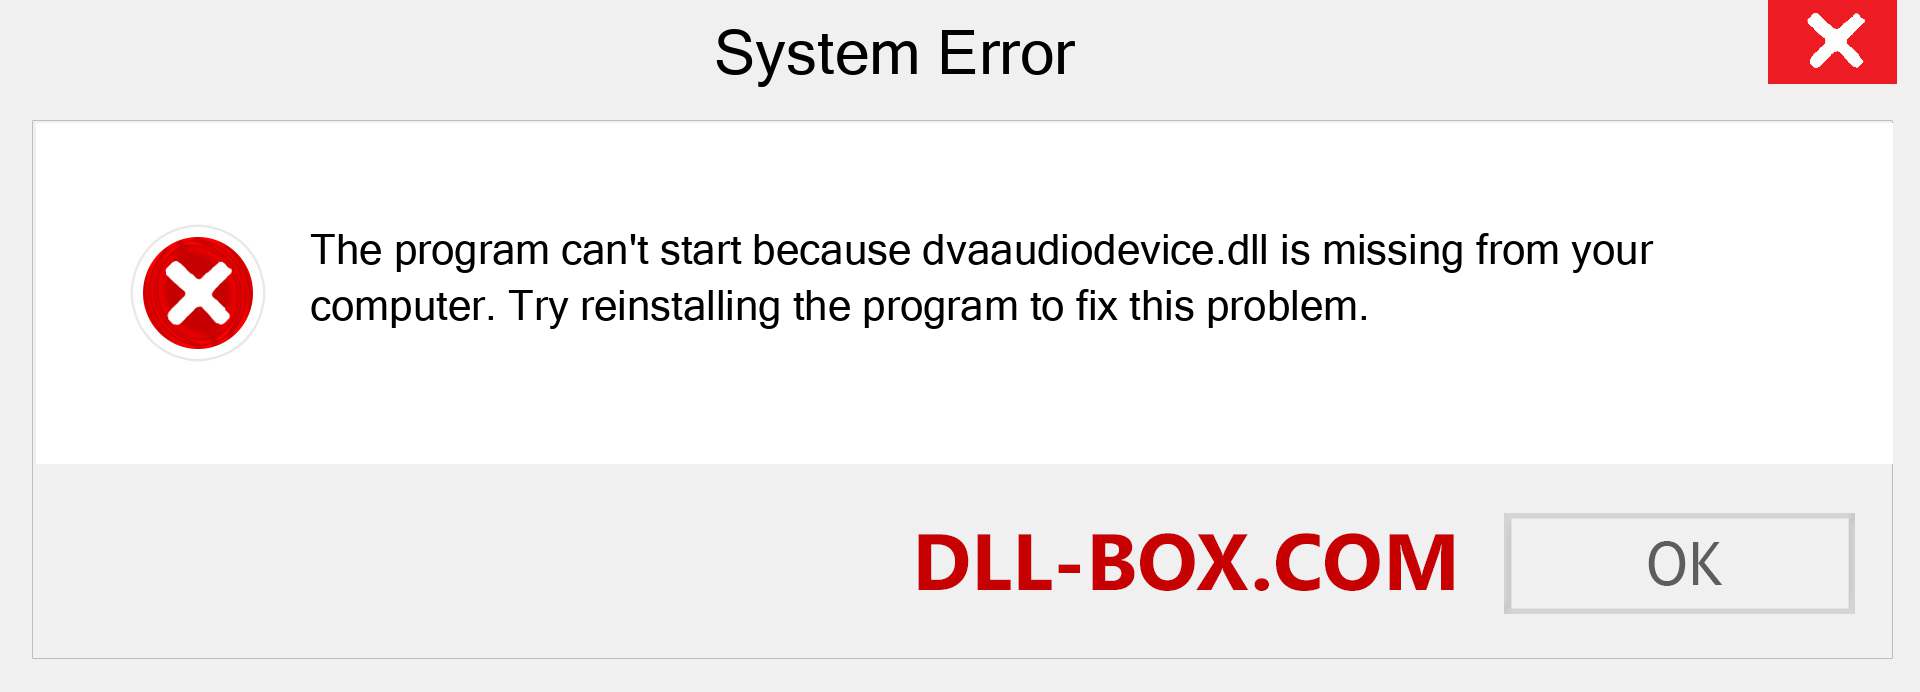  dvaaudiodevice.dll file is missing?. Download for Windows 7, 8, 10 - Fix  dvaaudiodevice dll Missing Error on Windows, photos, images